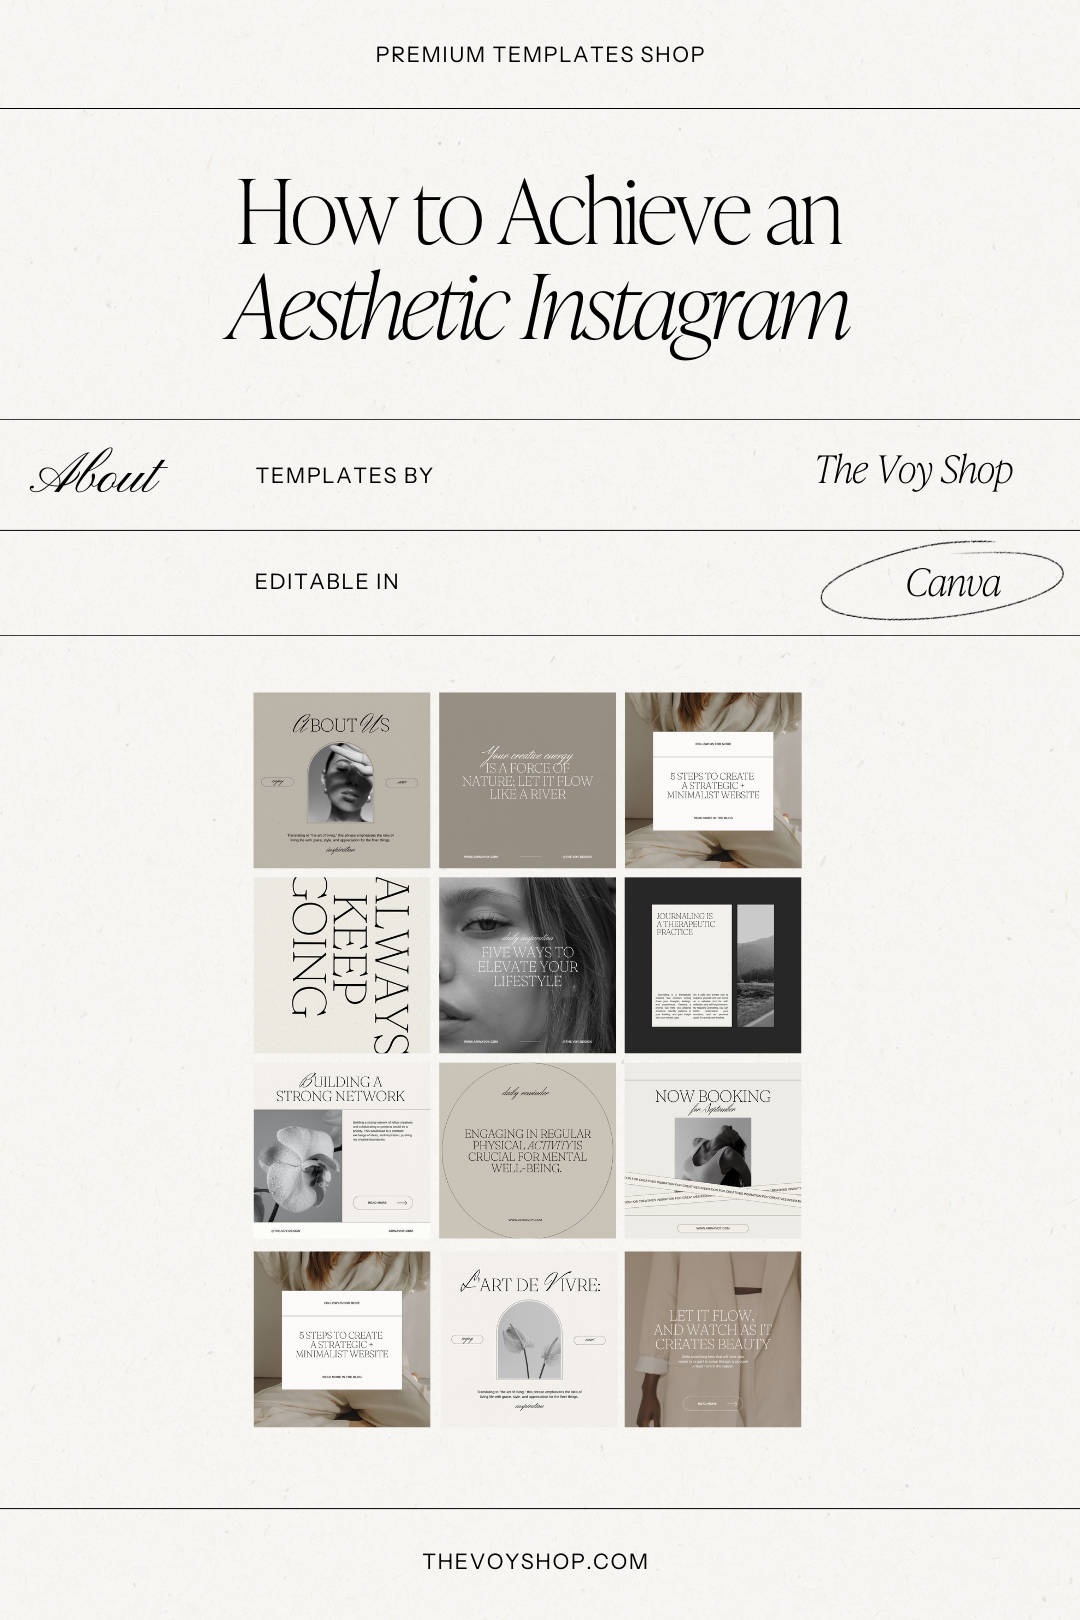 8 Simple Steps to Achieve an Aesthetic Instagram Feed